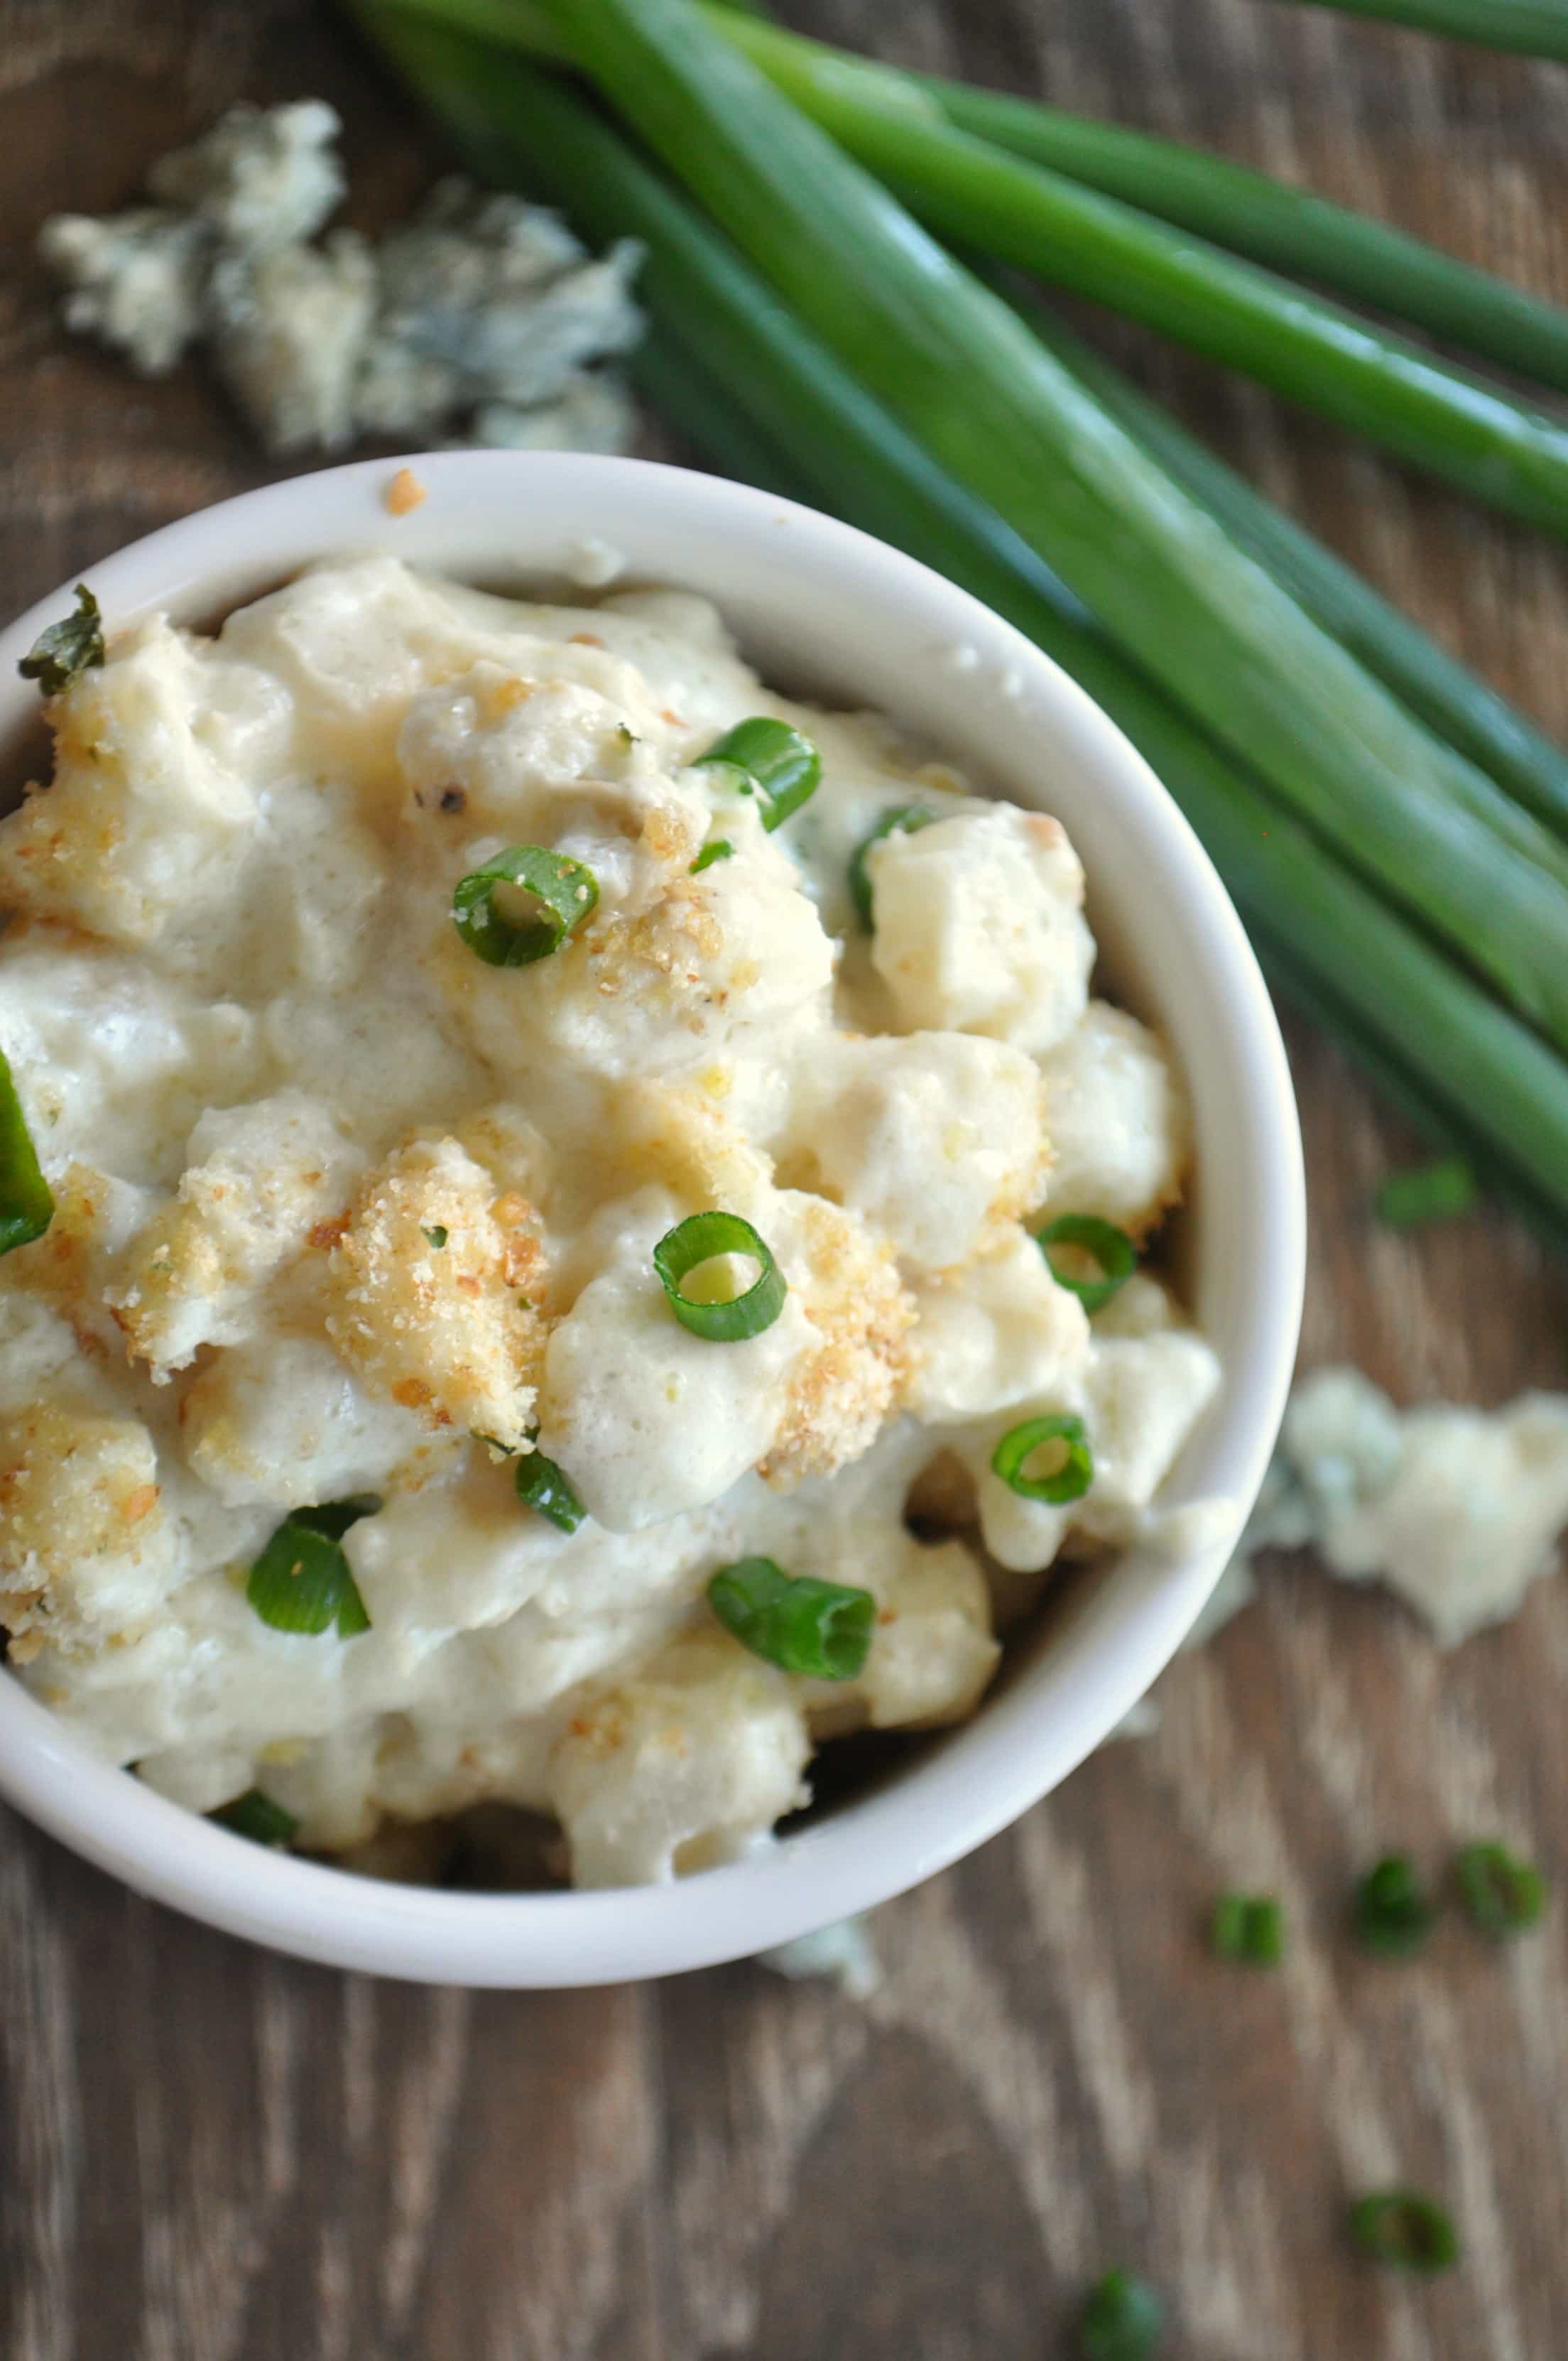 Overhead view of blue cheese hominy, showing bread crumb topping and green onion garnish. 